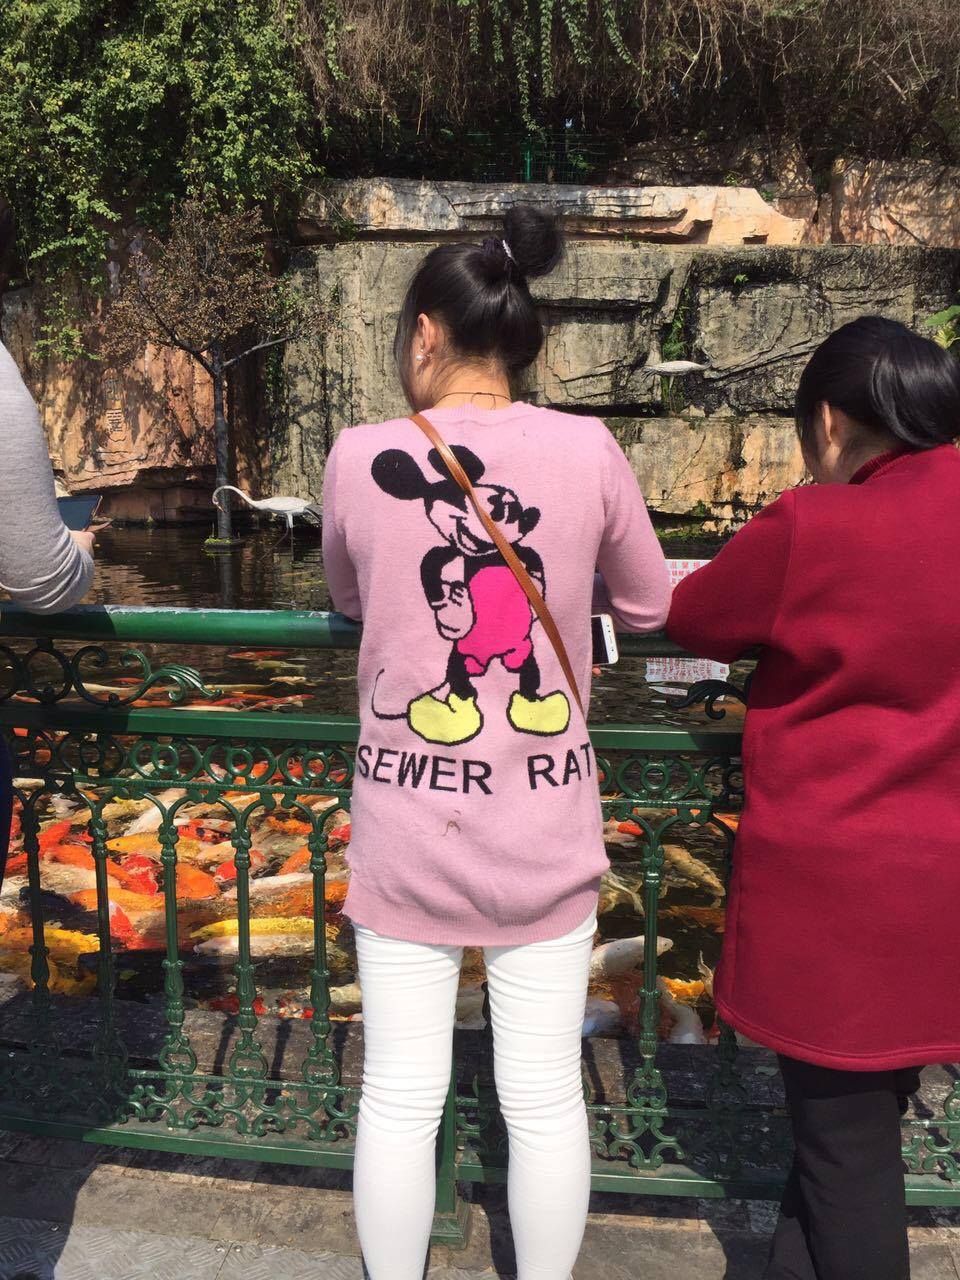 My girlfriend's in China, she sent me photo of girl wearing Mickey Mouse shirt, but something's not quite right...